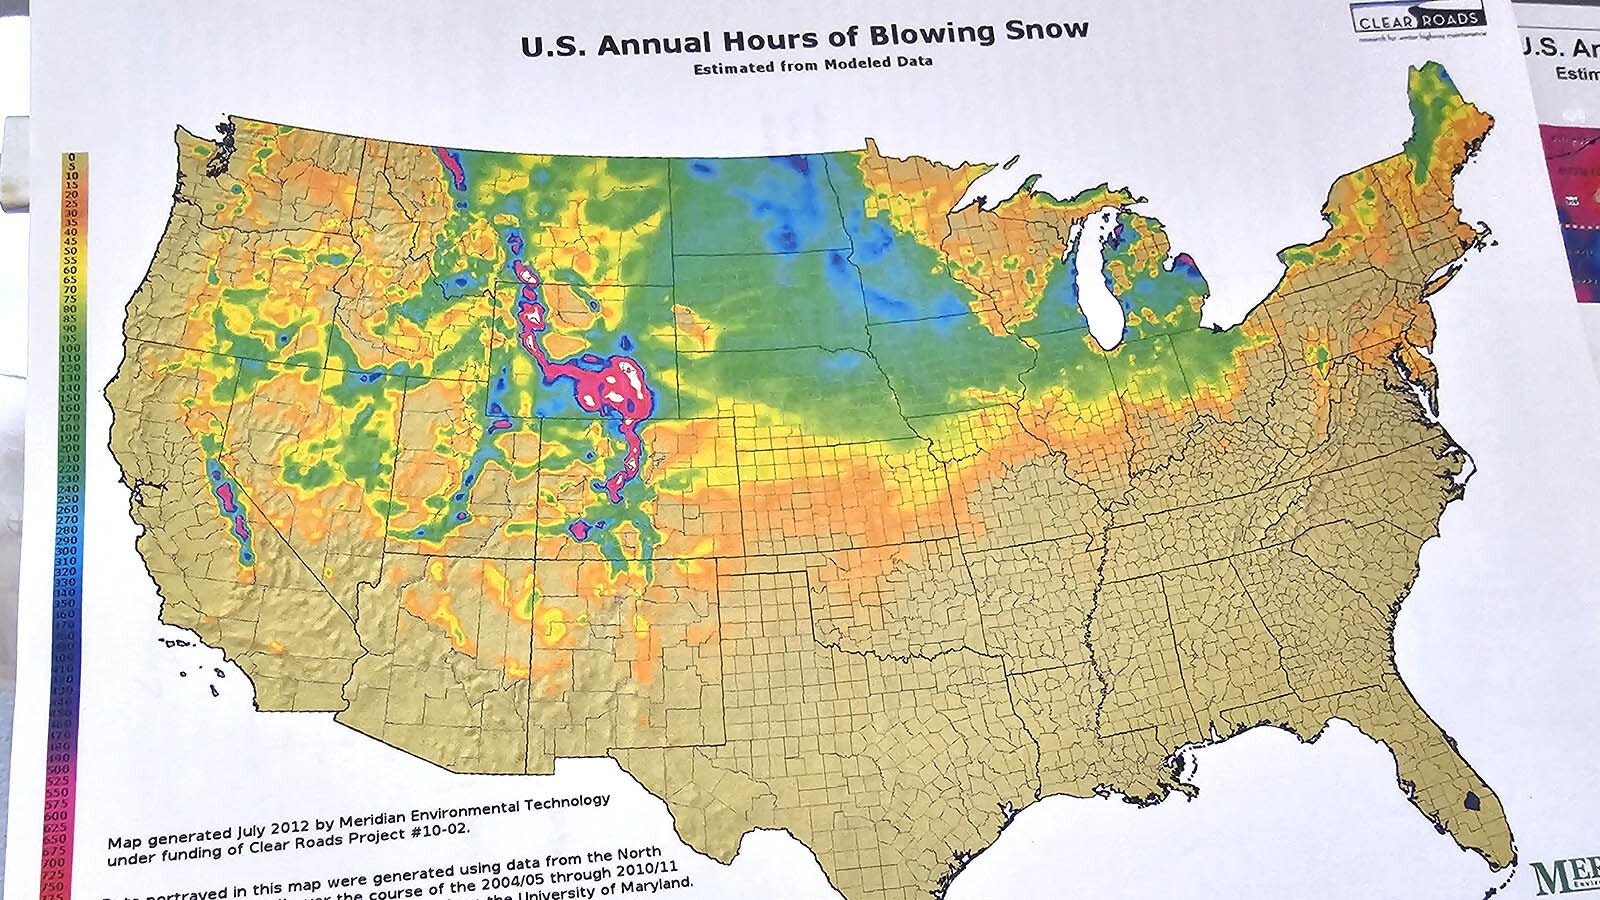 This map shows the annual hours of blowing snow in the United States. Pink and white are the highest extremes.